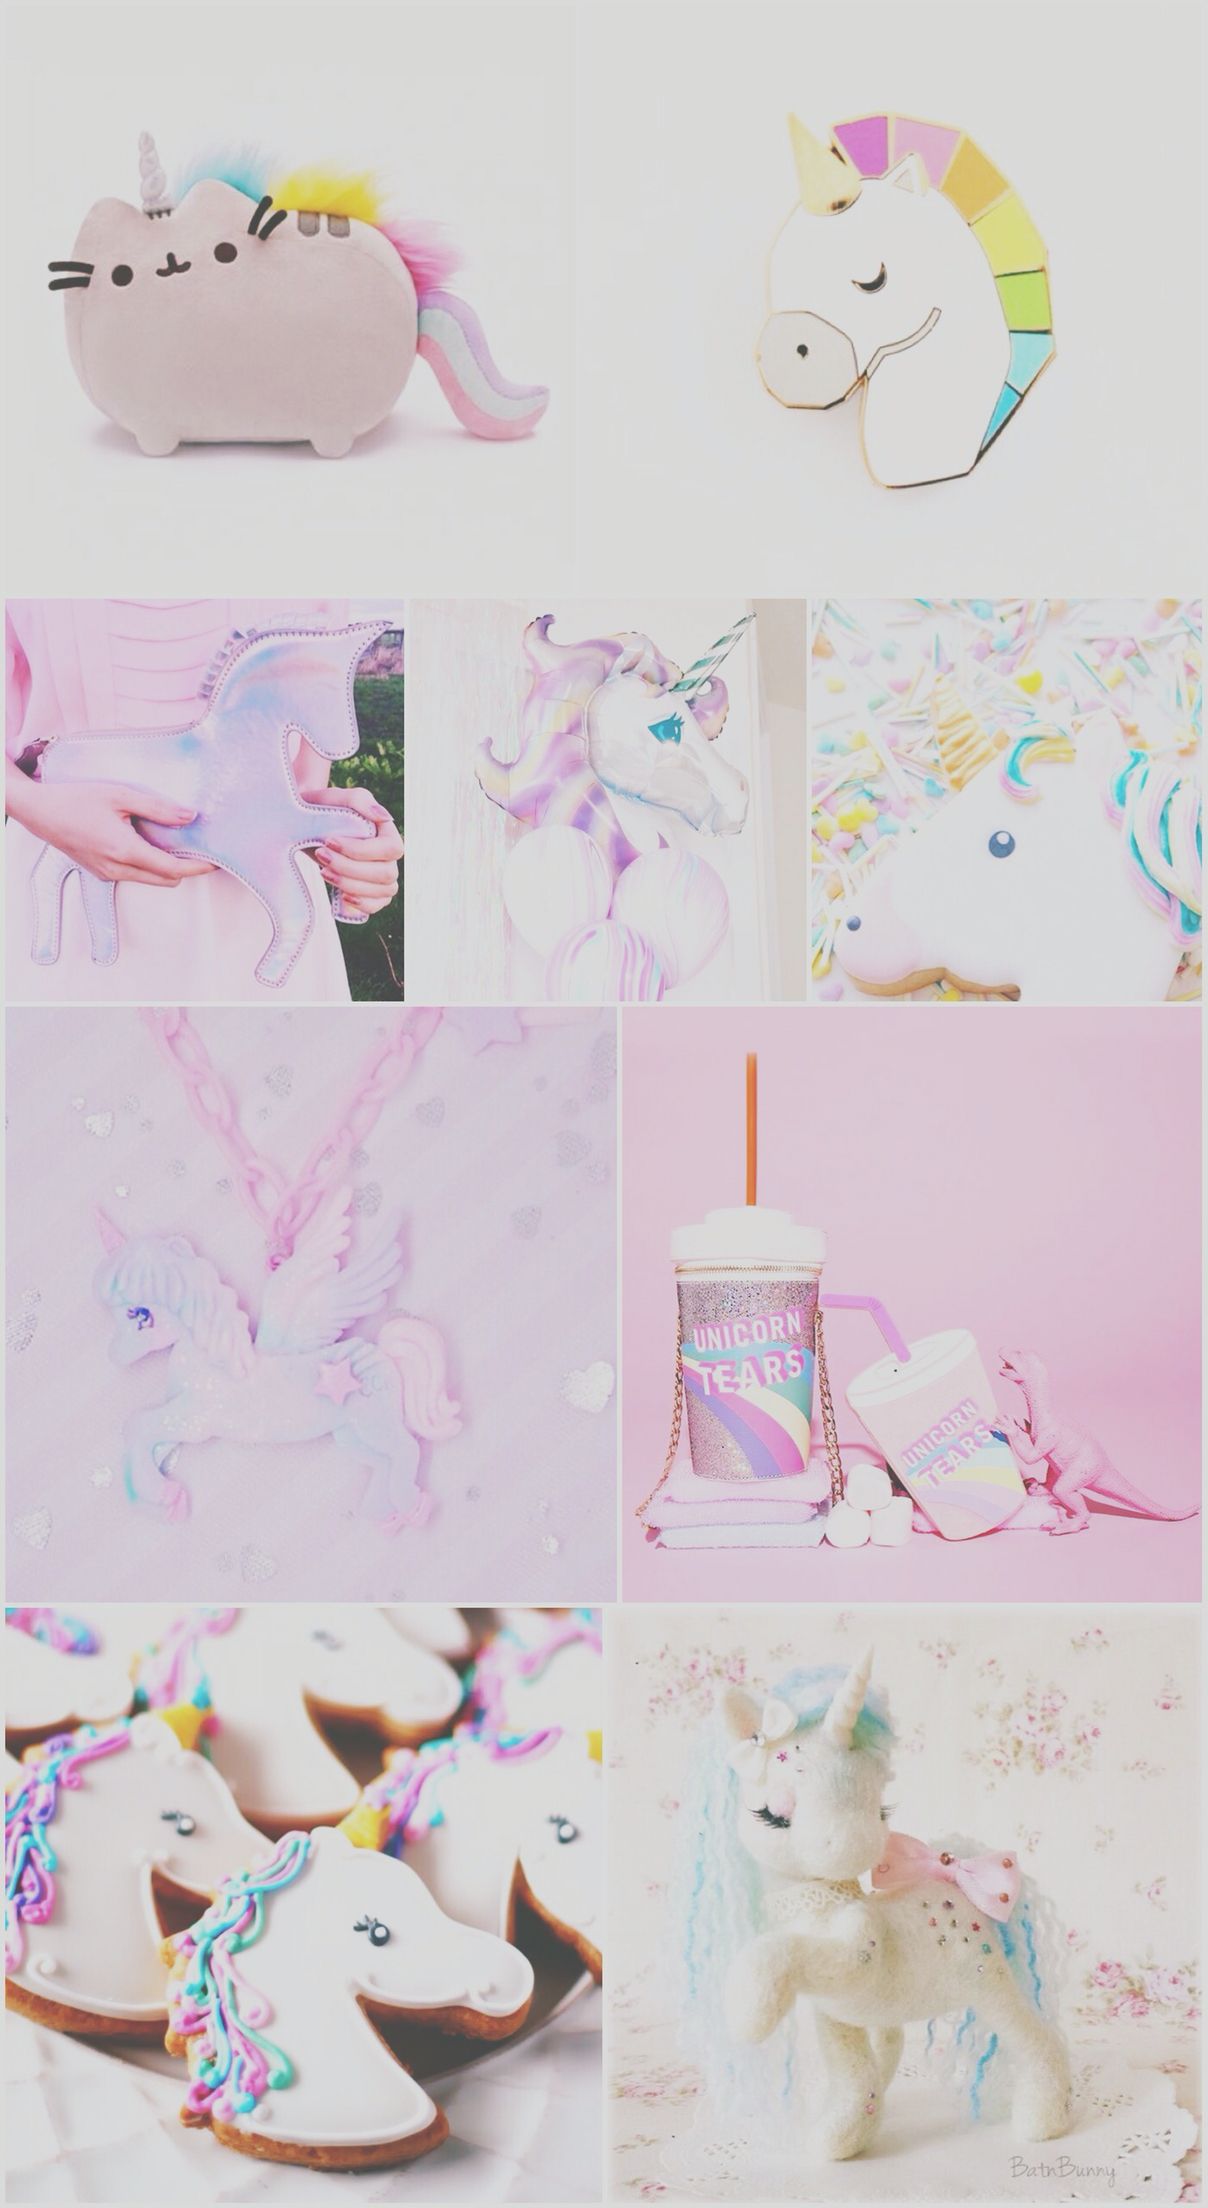 A collage of pictures with unicorns and other items - Unicorn